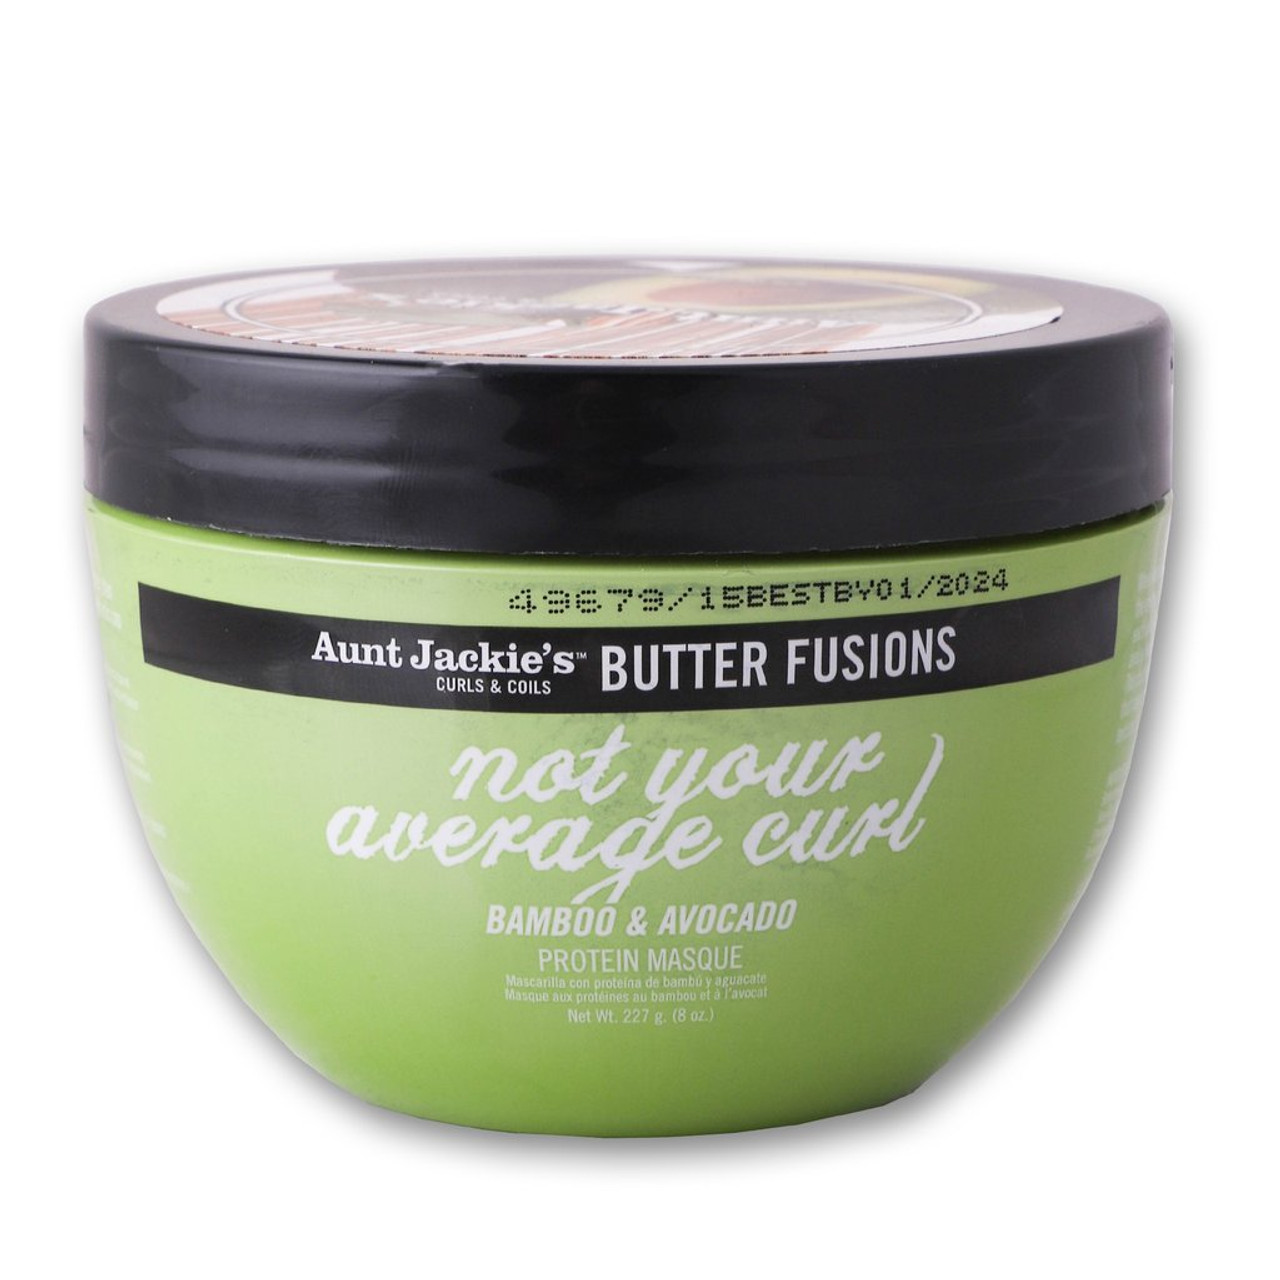 Aunt Jackies Butter Fusions Bamboo & Avocado Not Your Average Curl Protein Masque 8oz